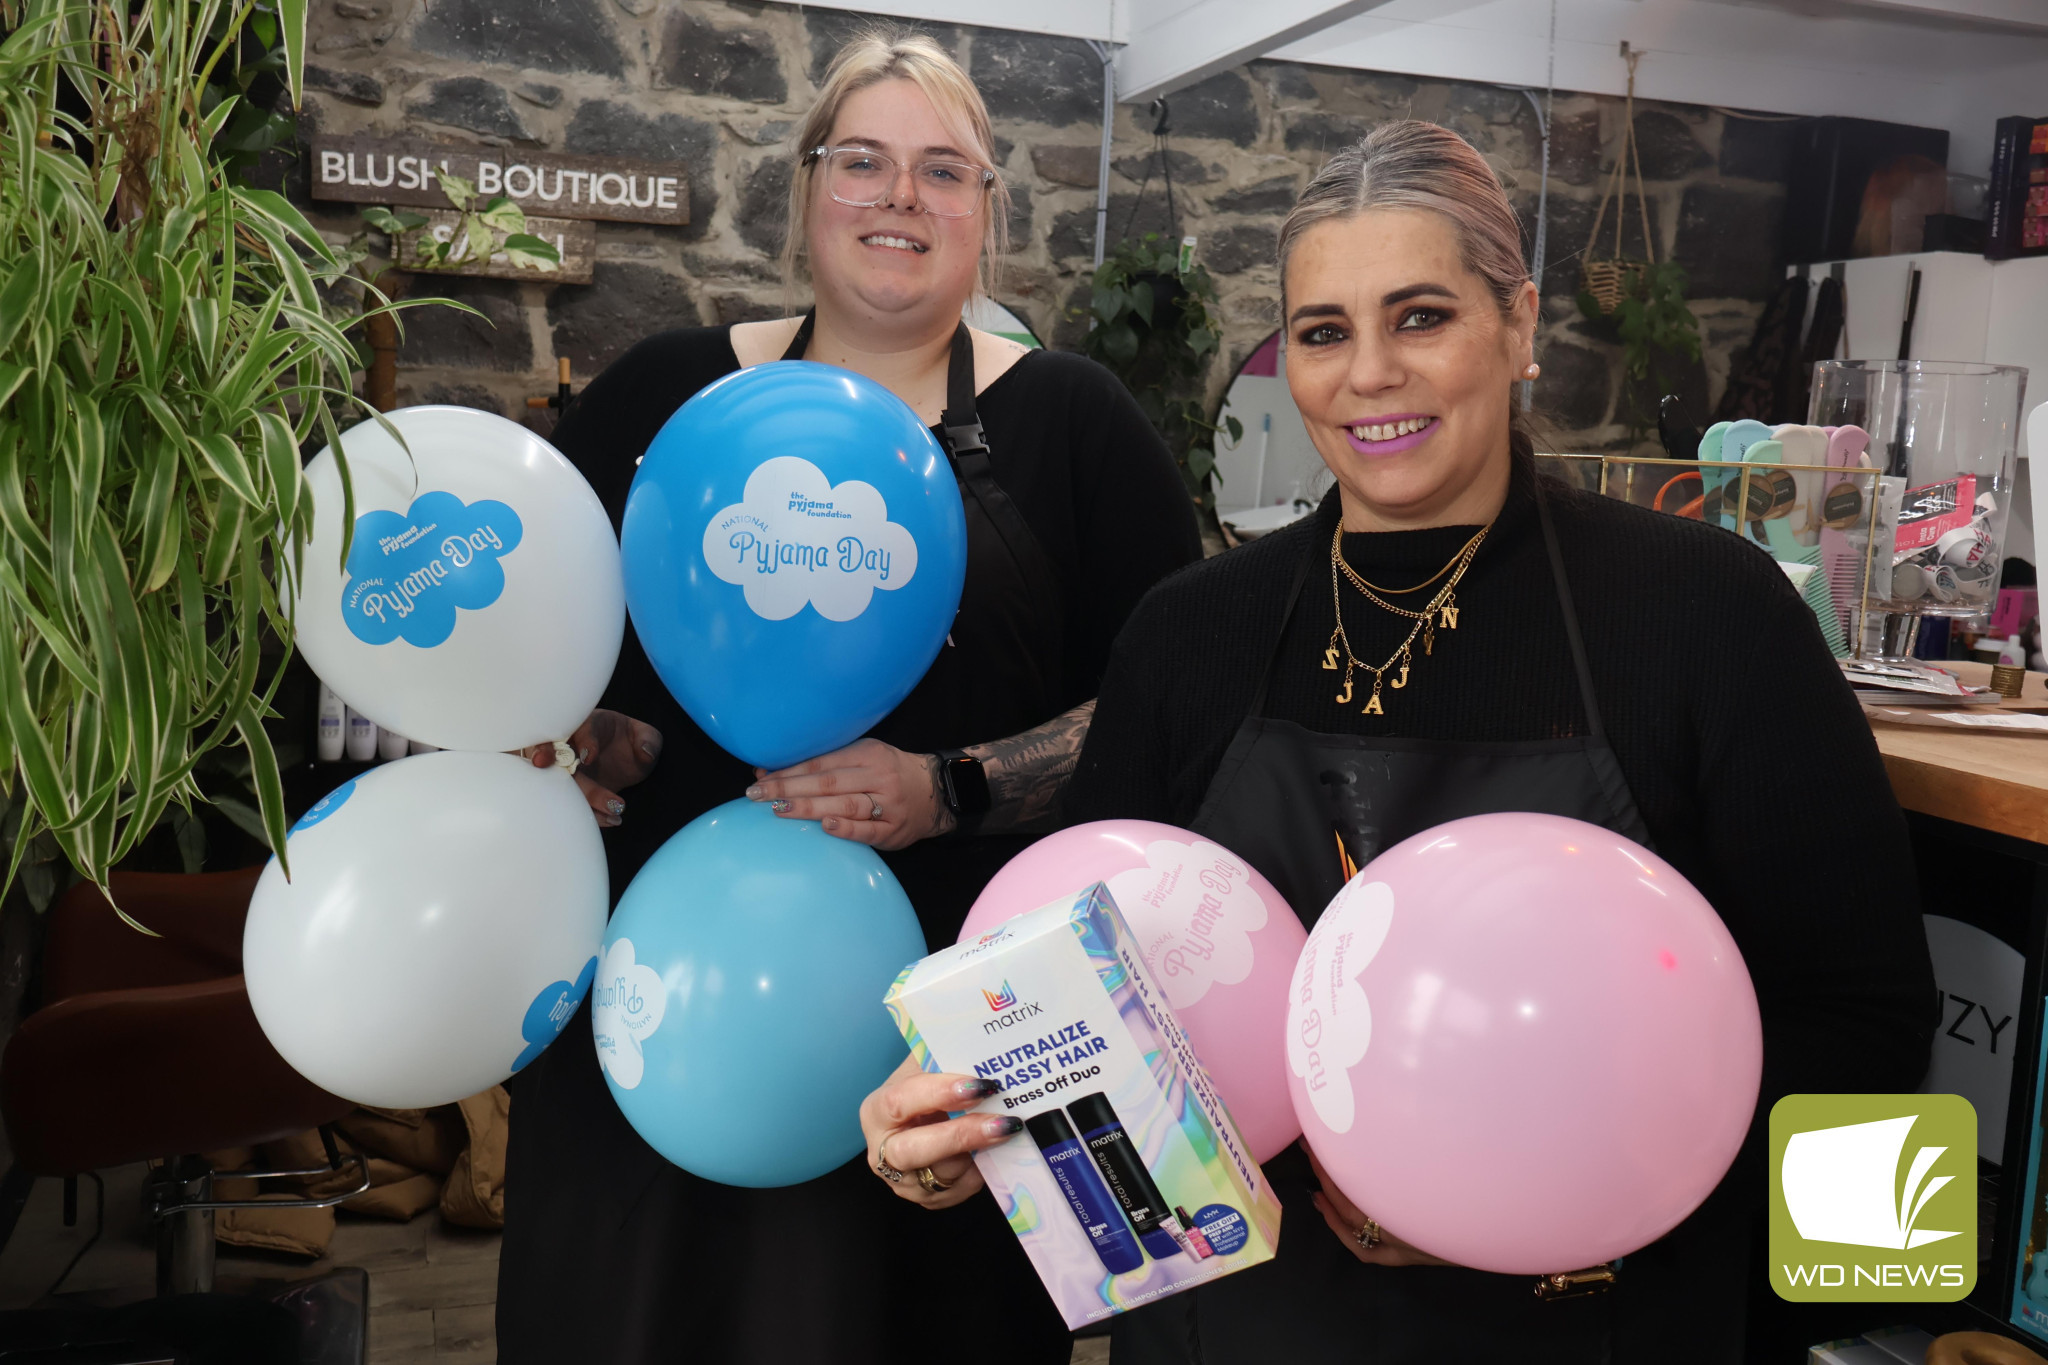 Nobody left behind: Blush Boutique Salon manager Emily Thorne and senior hairdresser Naomi Gibbs wore their pyjamas to work last week as part of a national fundraiser to support children in foster care.